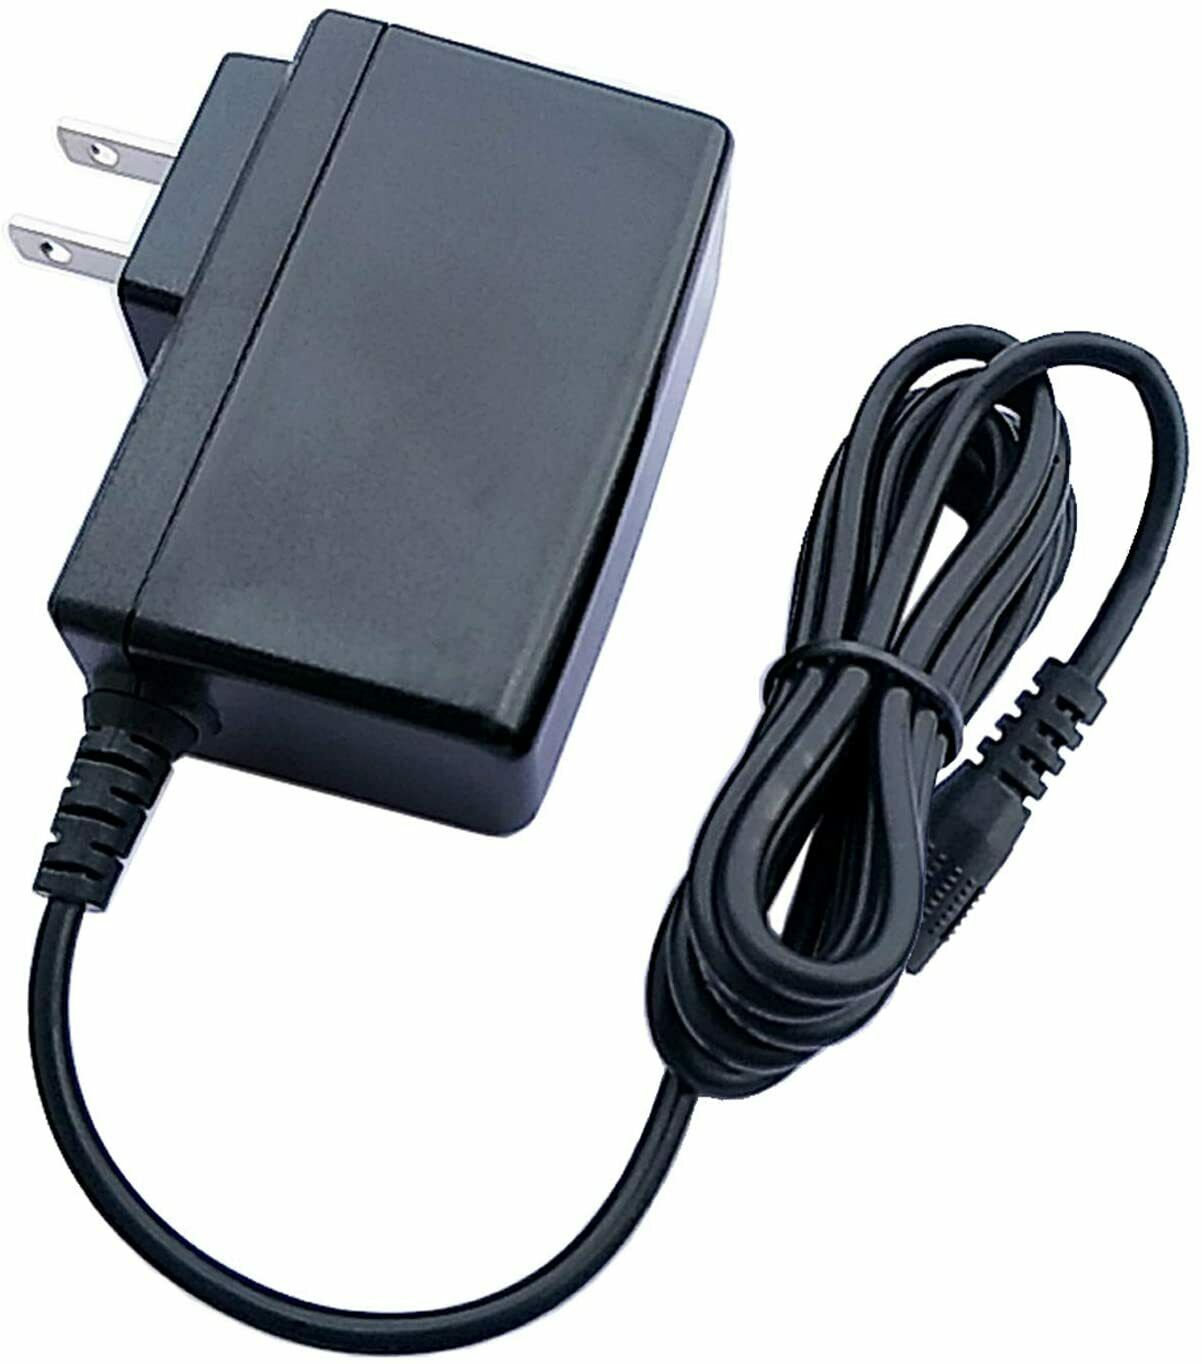 AC Adapter for Razor Kids Toy Motorized Electric Scooter 12V 1A Battery Charger Input Voltage: AC 100V--240V Input Fre